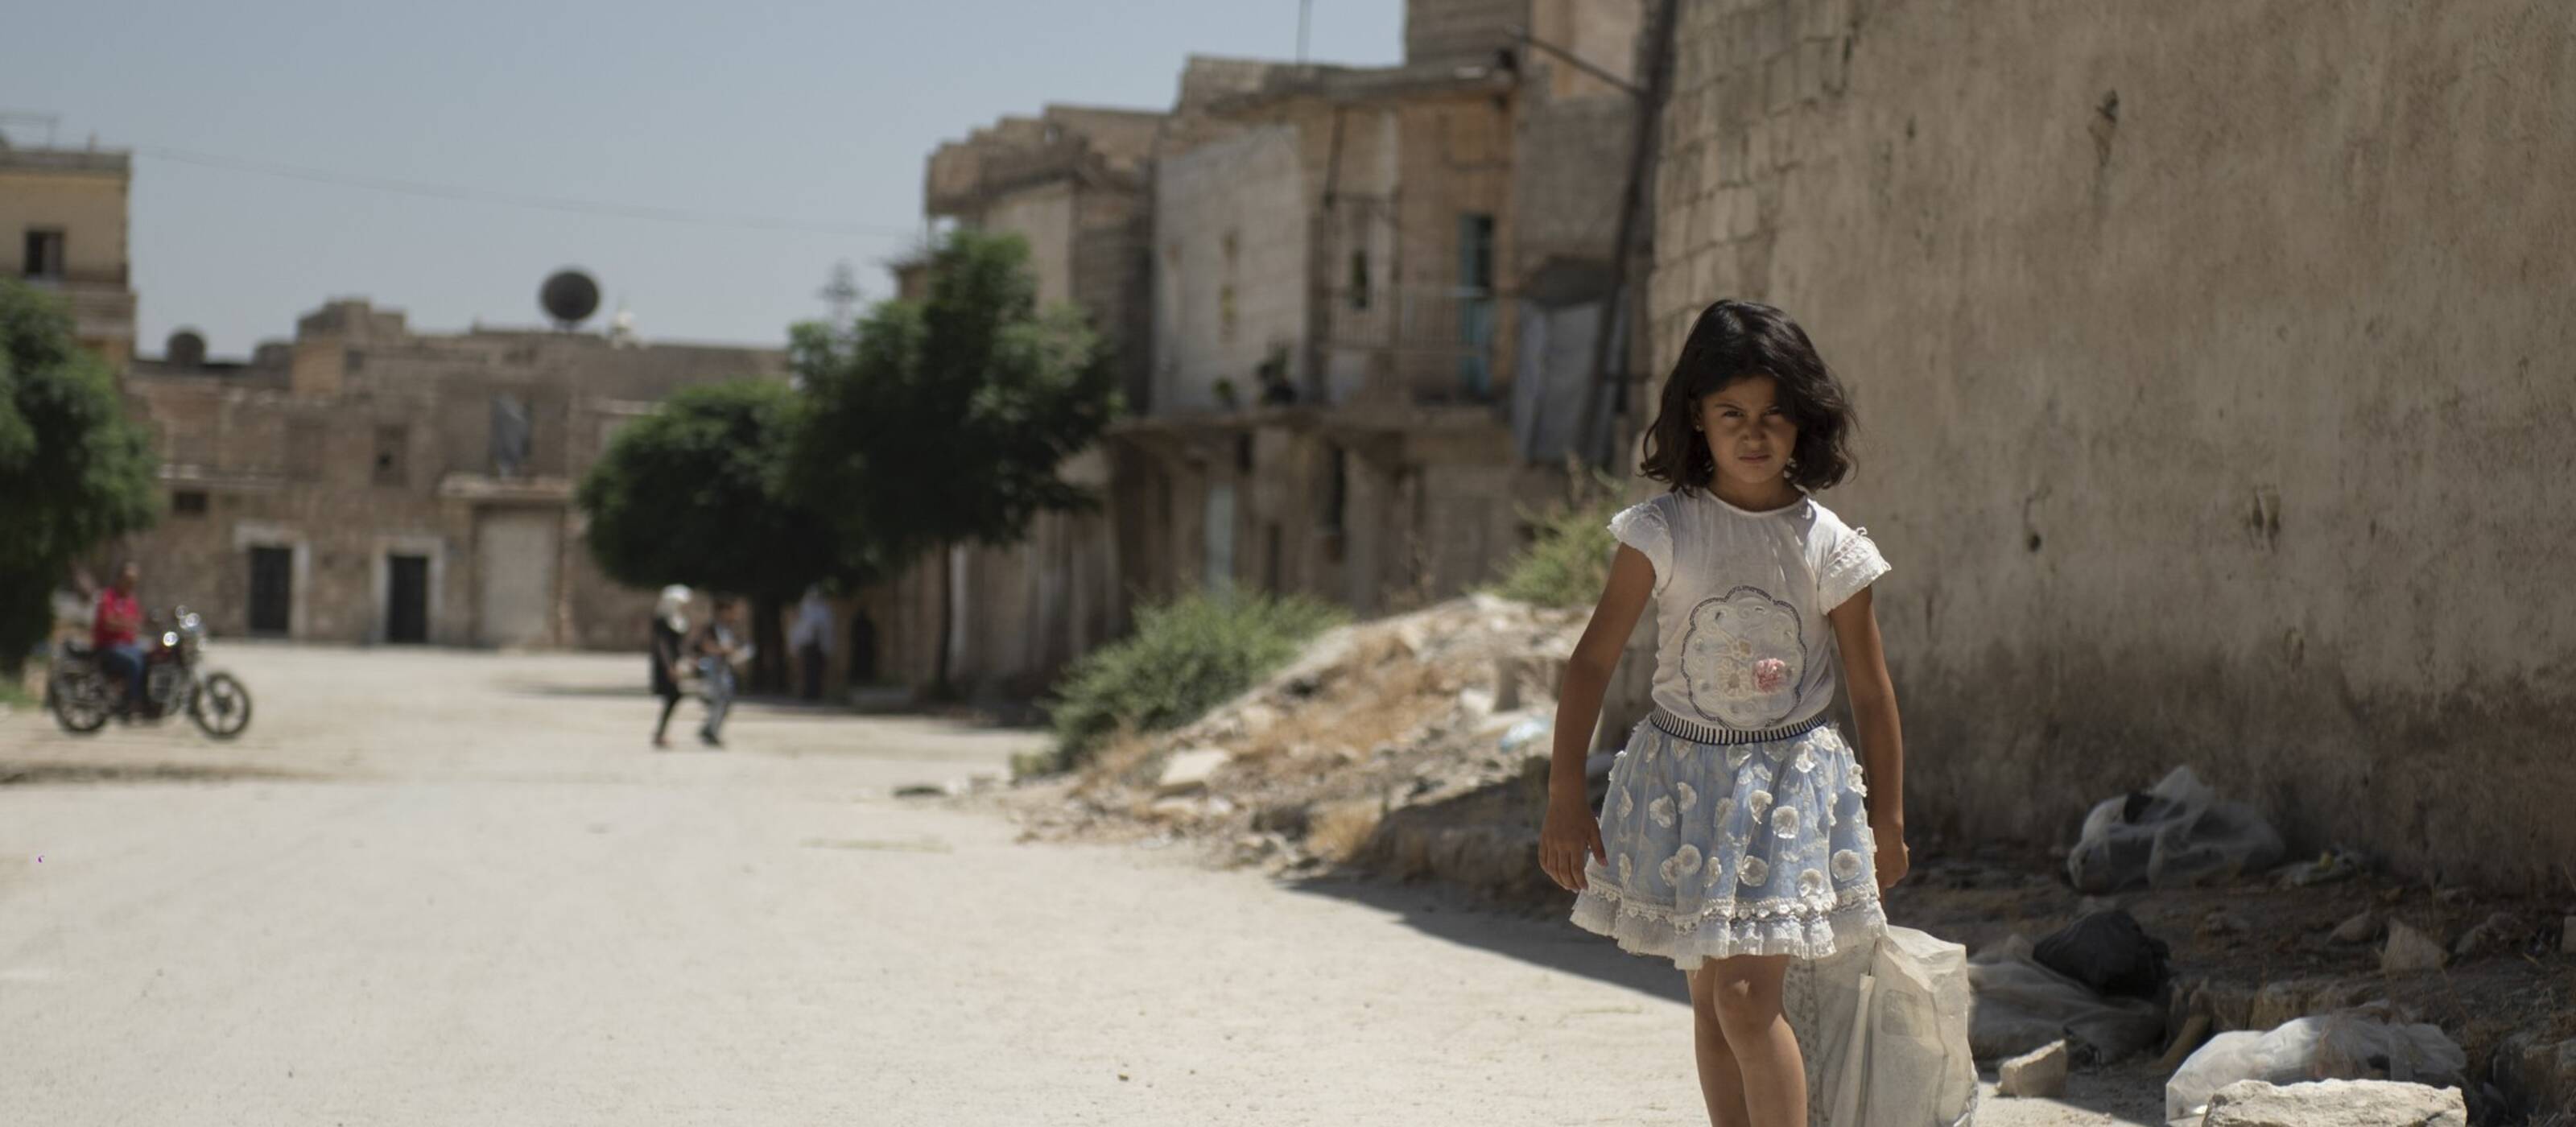 A girl walks through the Jabal Bedro neighbourhood in Aleppo, a city shattered by the earthquake and the war.